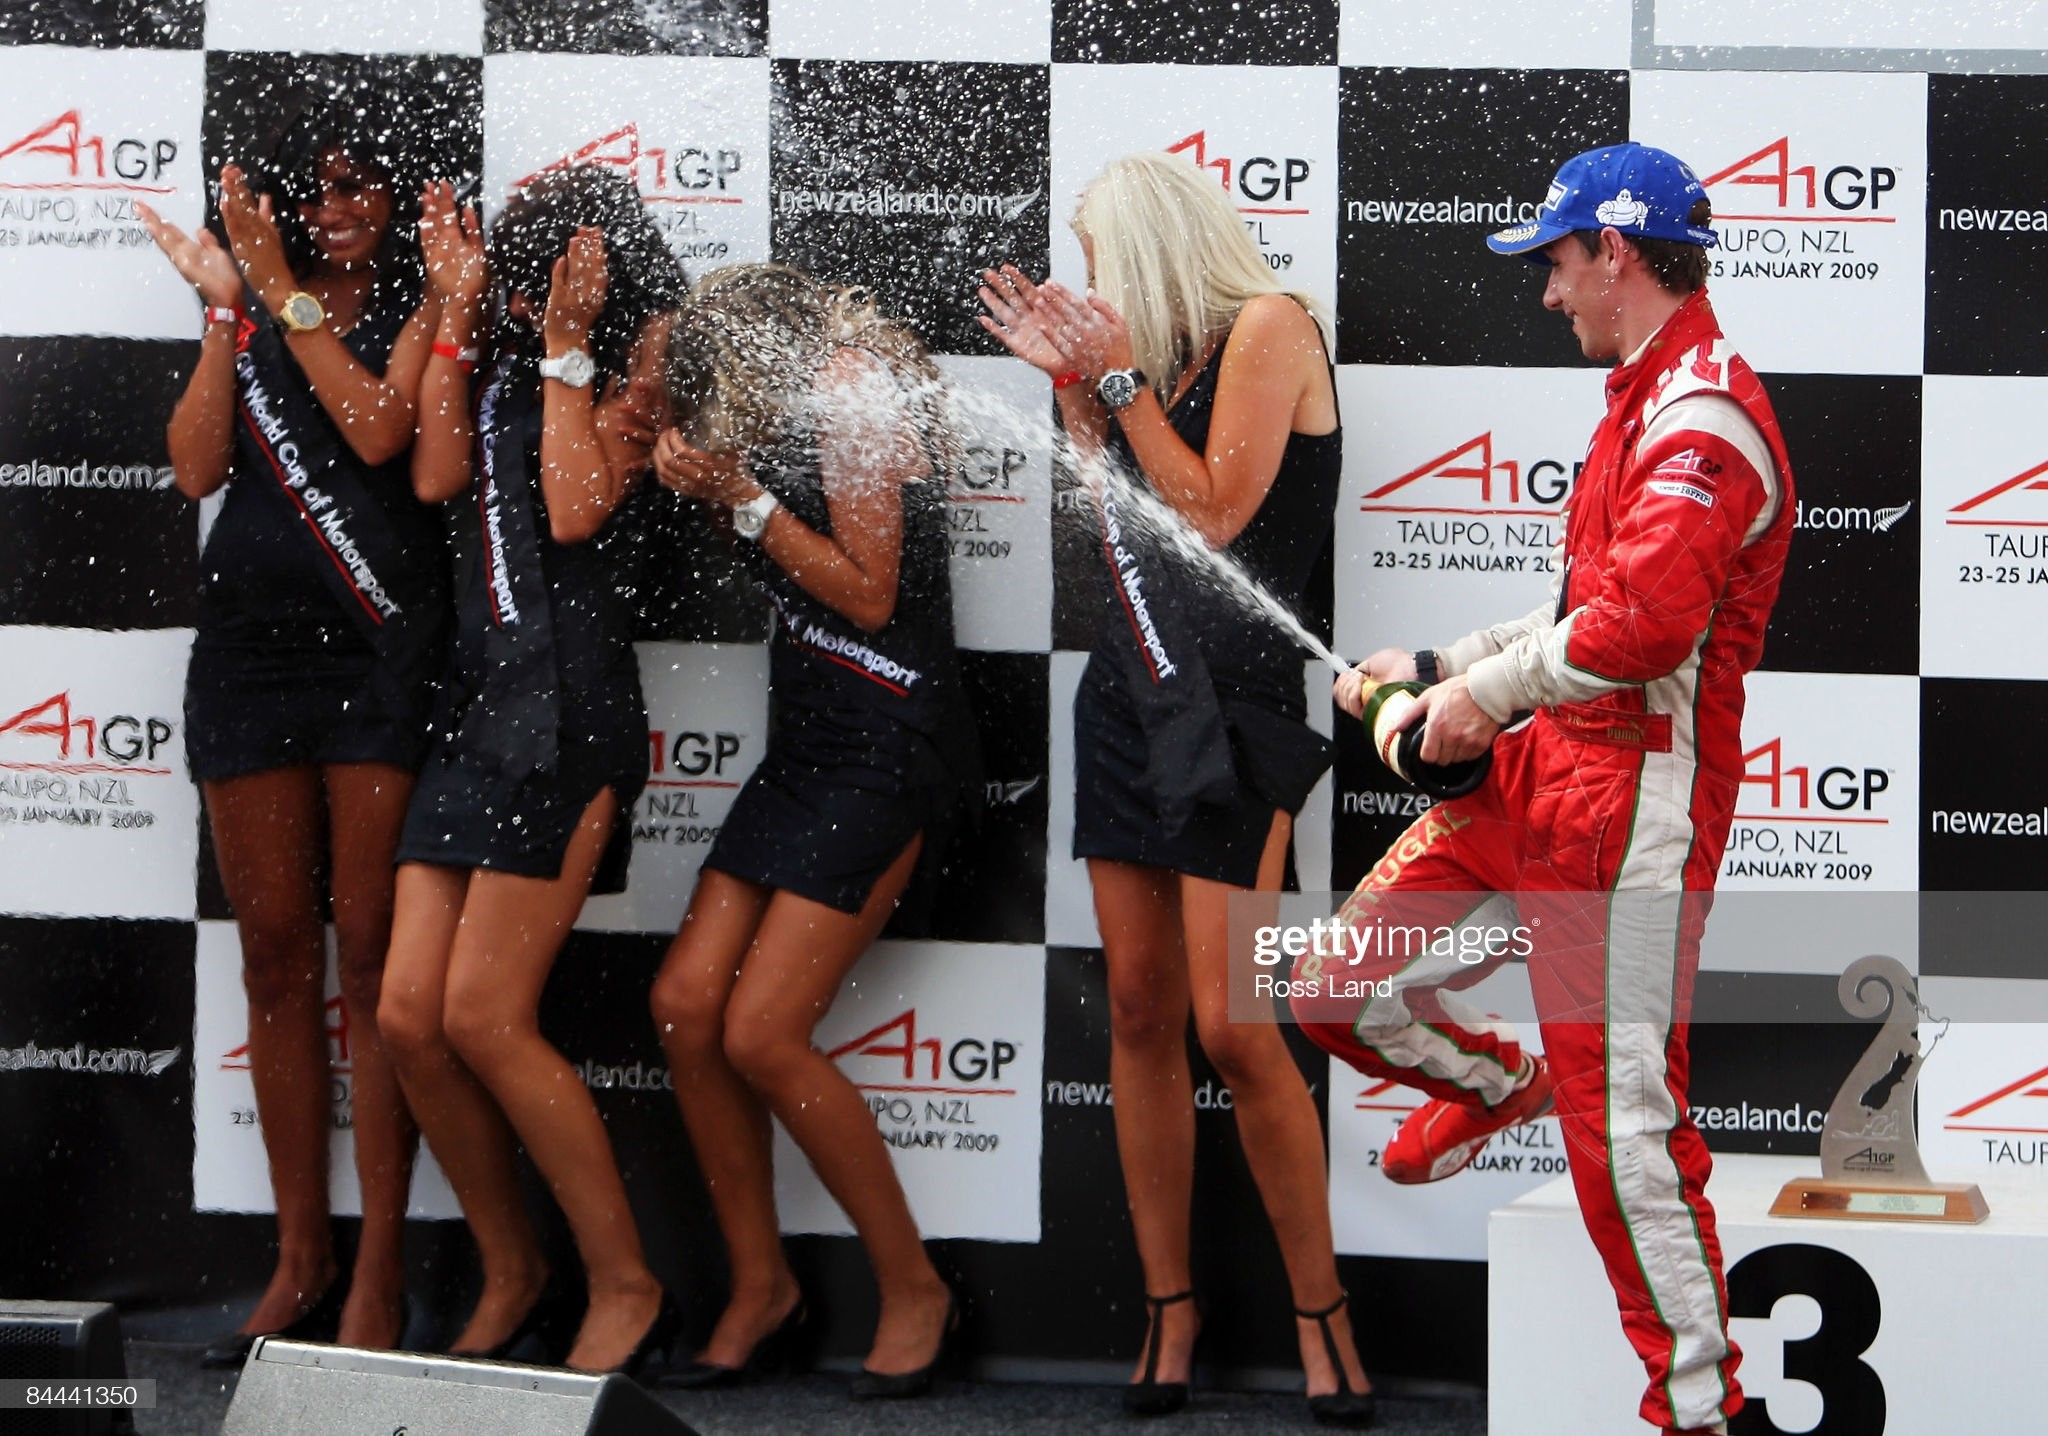 Filepe Albuquerque of Portugal sprays the grid girls with champagne following the feature race at the New Zealand A1 Grand Prix at the Taupo Race Track on January 25, 2009 in Taupo, New Zealand. 